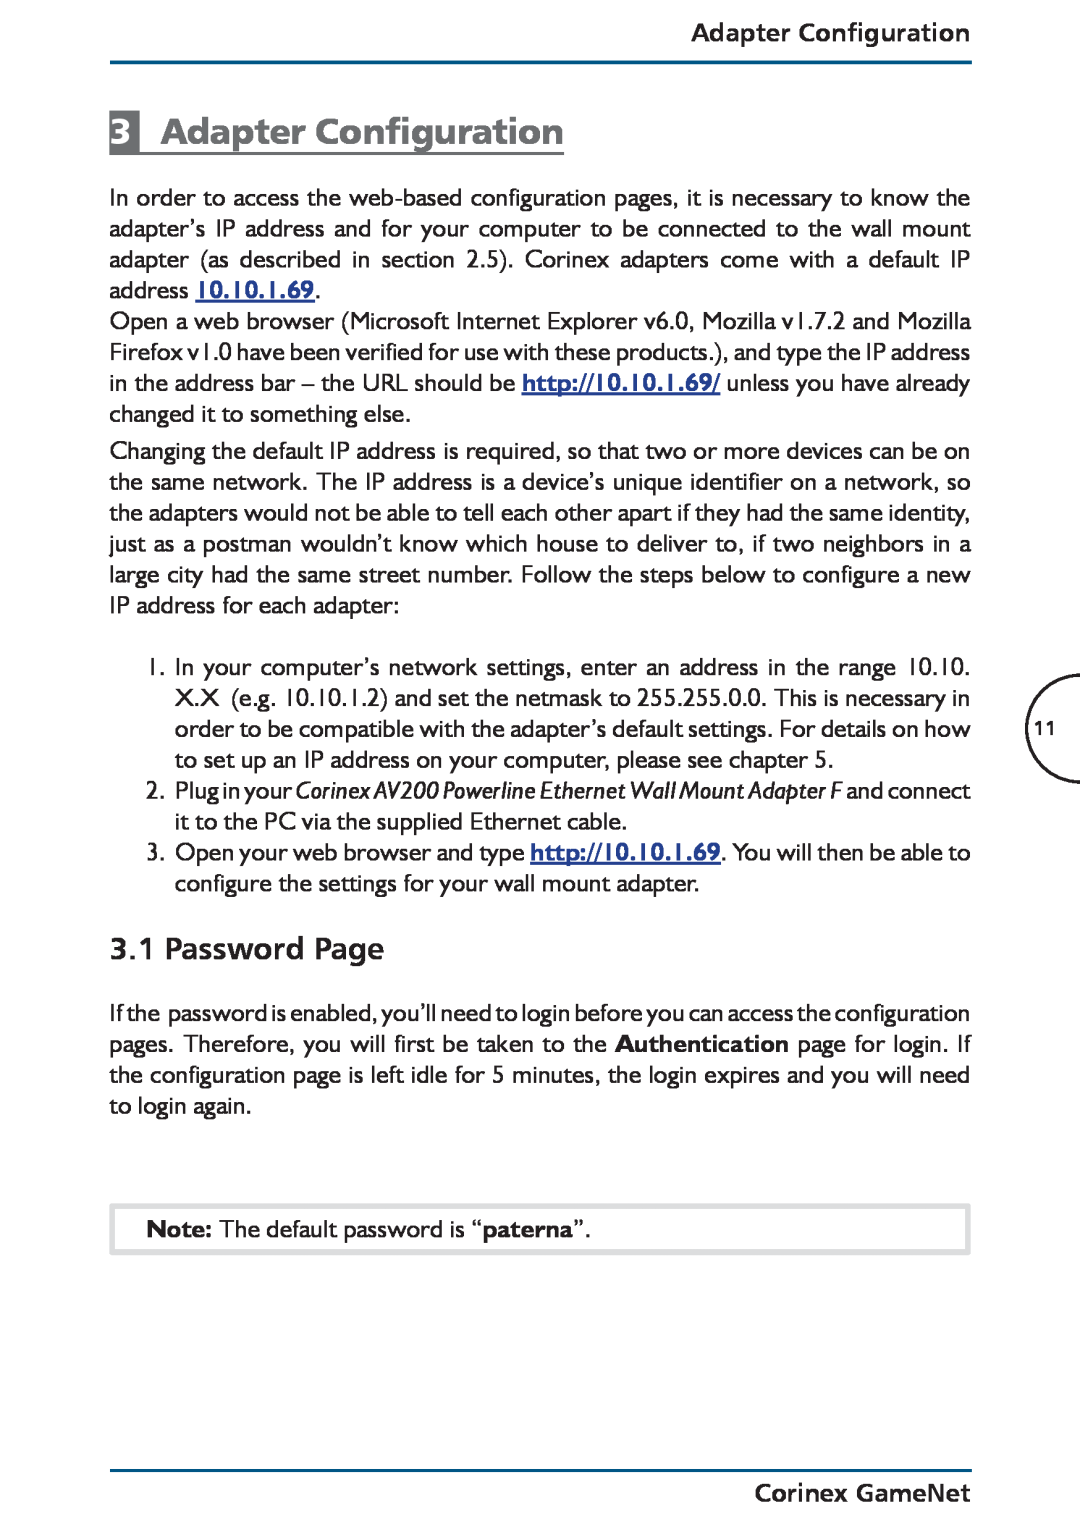 Corinex Global GameNet Adapter Configuration, Password Page, to set up an IP address on your computer, please see chapter 